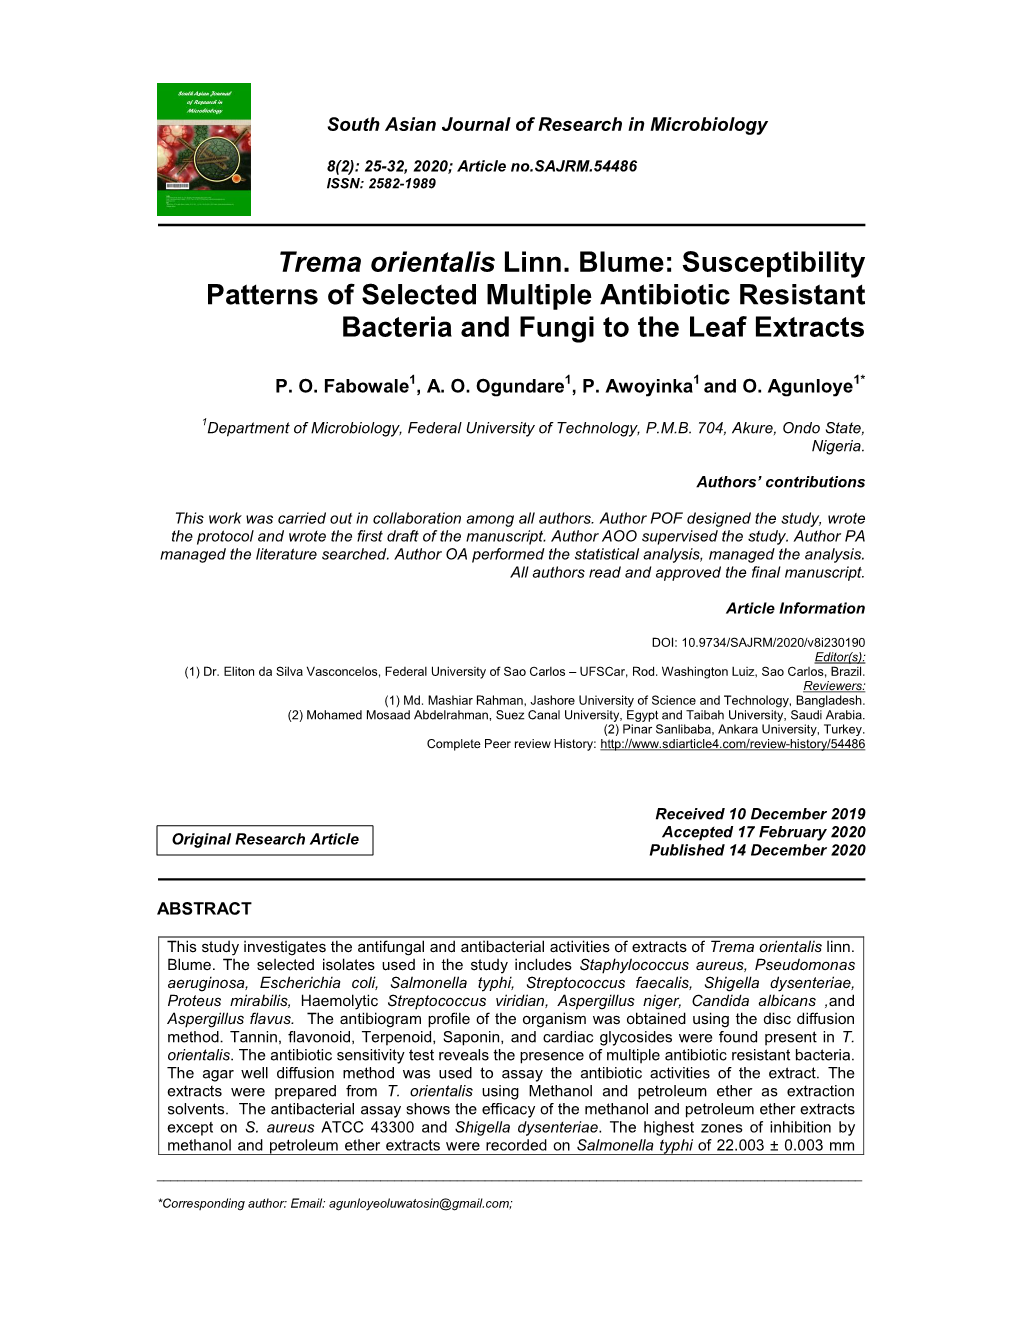 Trema Orientalis Linn. Blume: Susceptibility Patterns of Selected Multiple Antibiotic Resistant Bacteria and Fungi to the Leaf Extracts